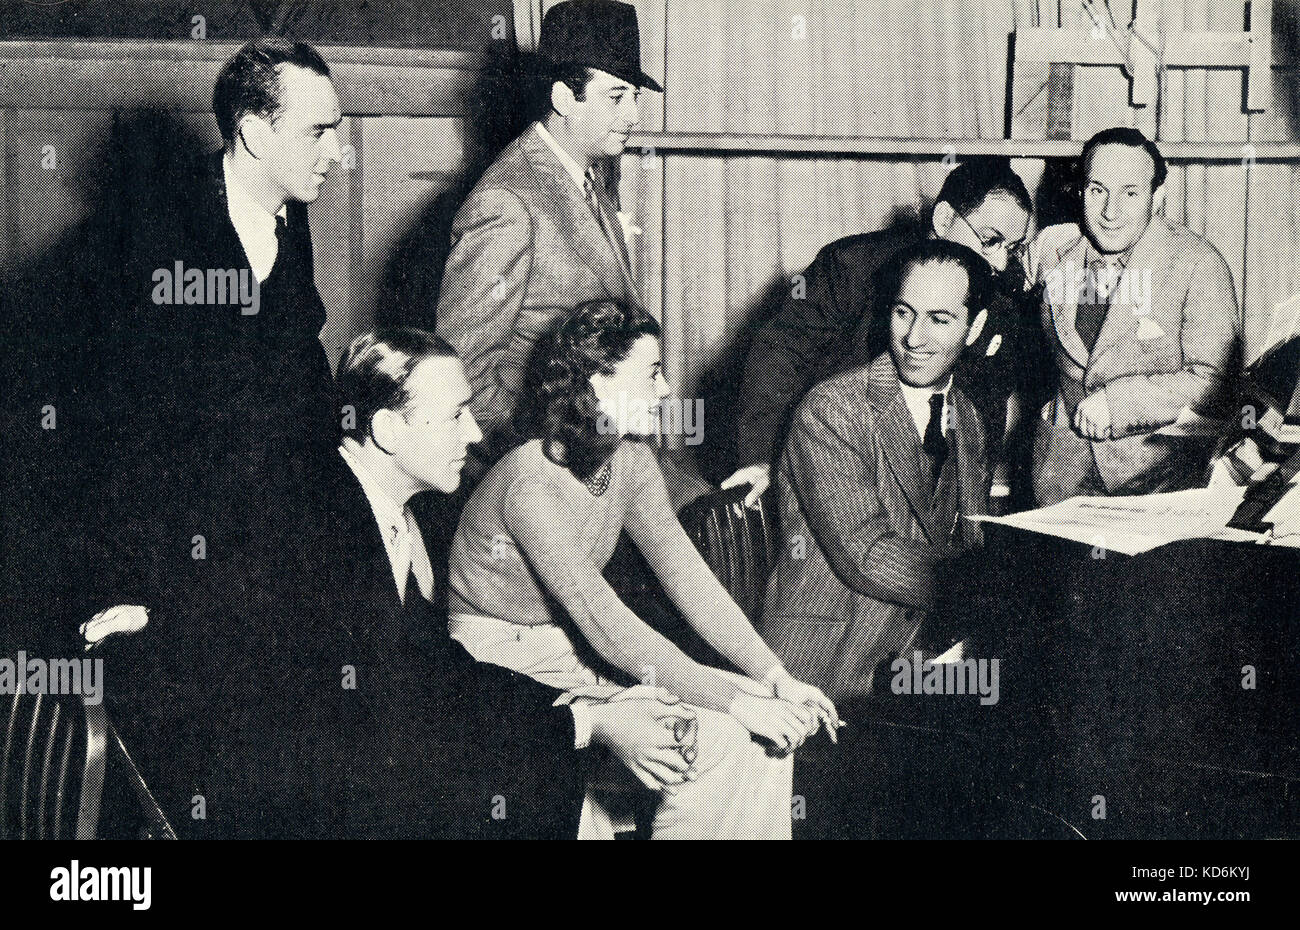 George Gershwin with Fred Astaire and Ginger Rogers (Seated). The composer at the piano playing his score for Shall We Dance? Also Nathaniel Shilkret (far right).    American composer & pianist, 1898-1937. Photo by RKO Radio Pictures, Inc. Stock Photo